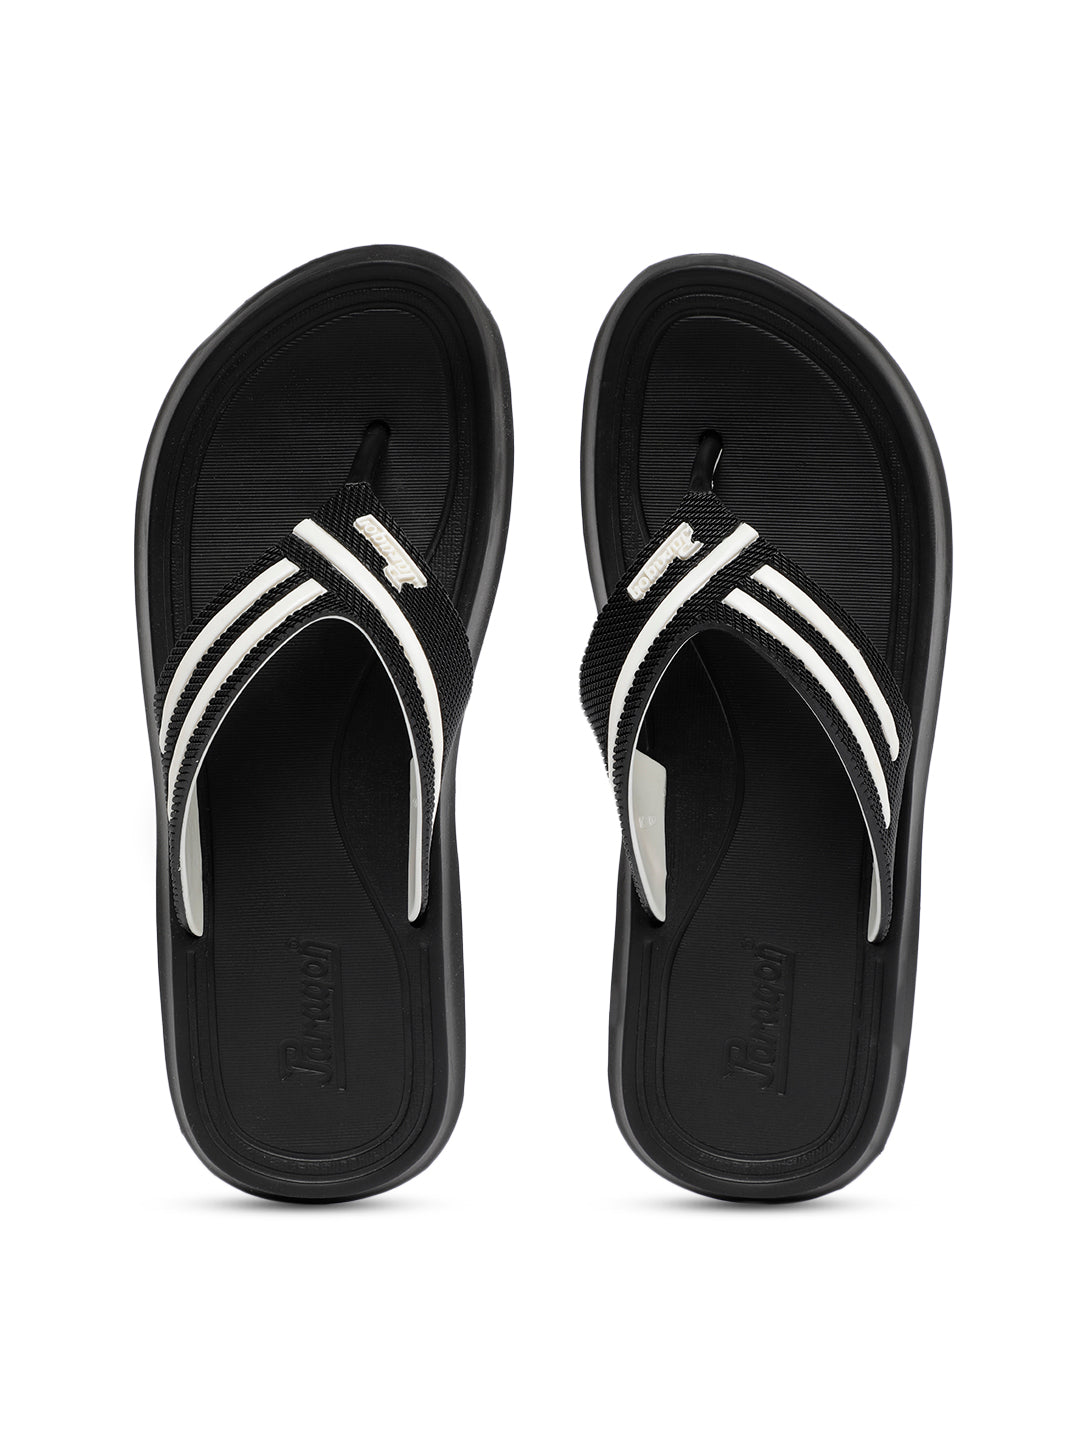 Paragon K3400G Men Stylish Lightweight Flipflops | Comfortable with Anti skid soles | Casual &amp; Trendy Slippers | Indoor &amp; Outdoor